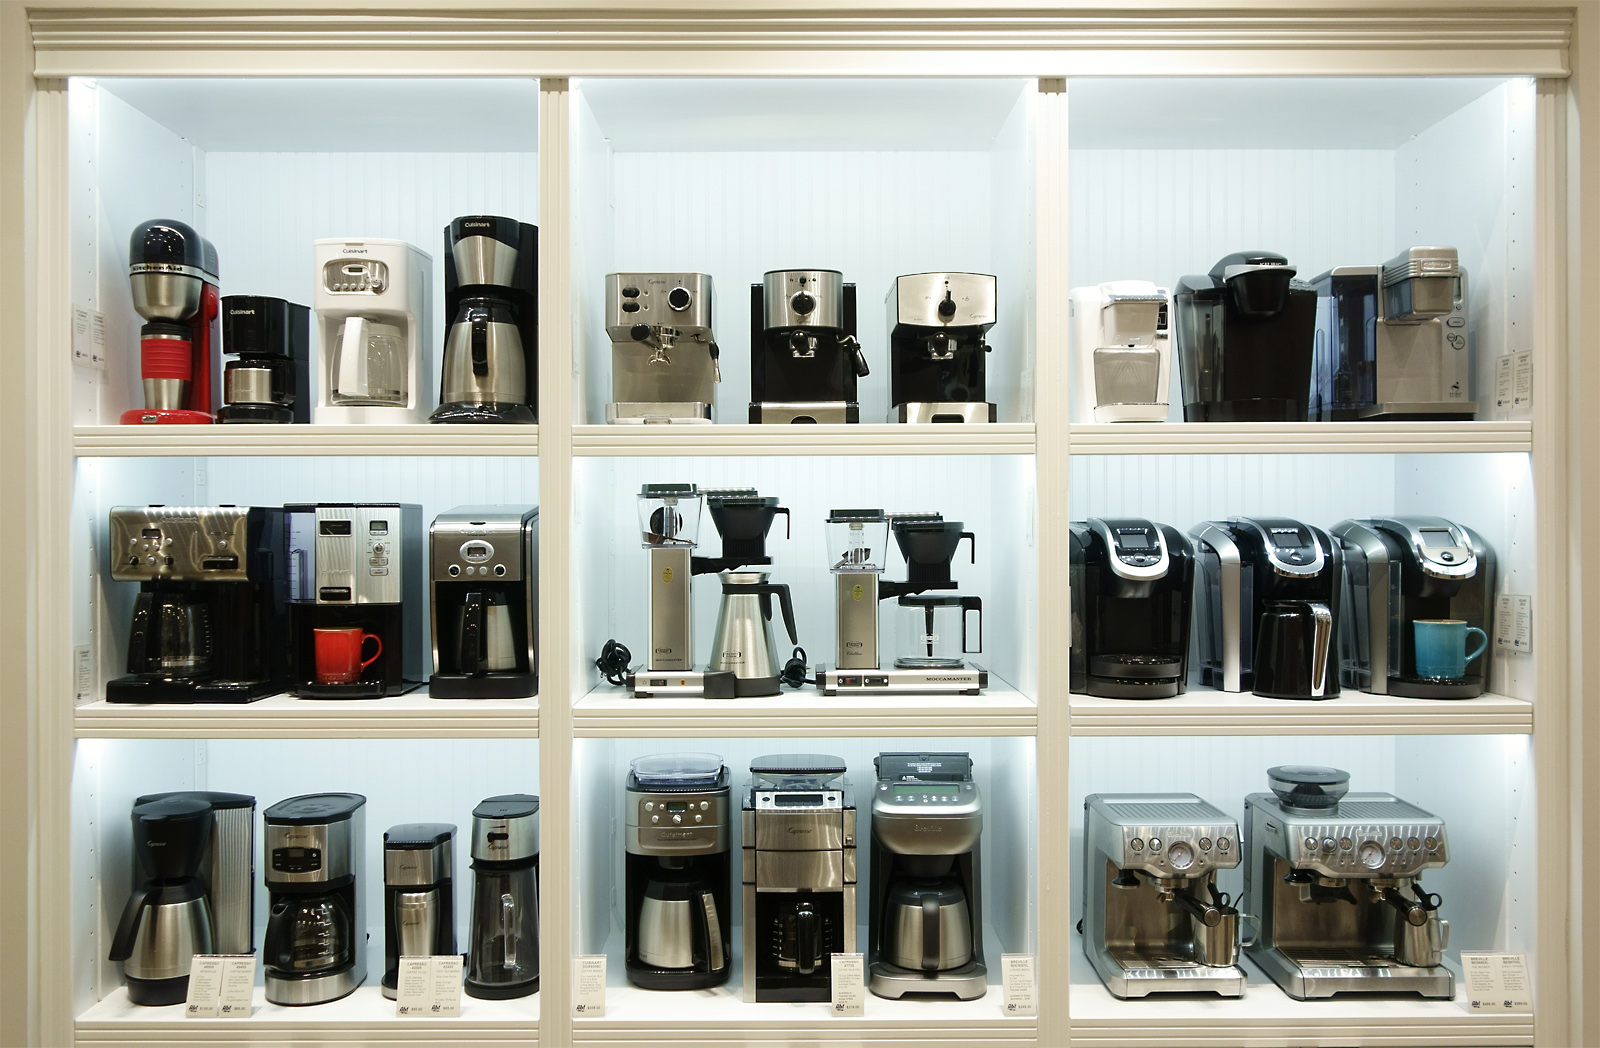 coffee makers